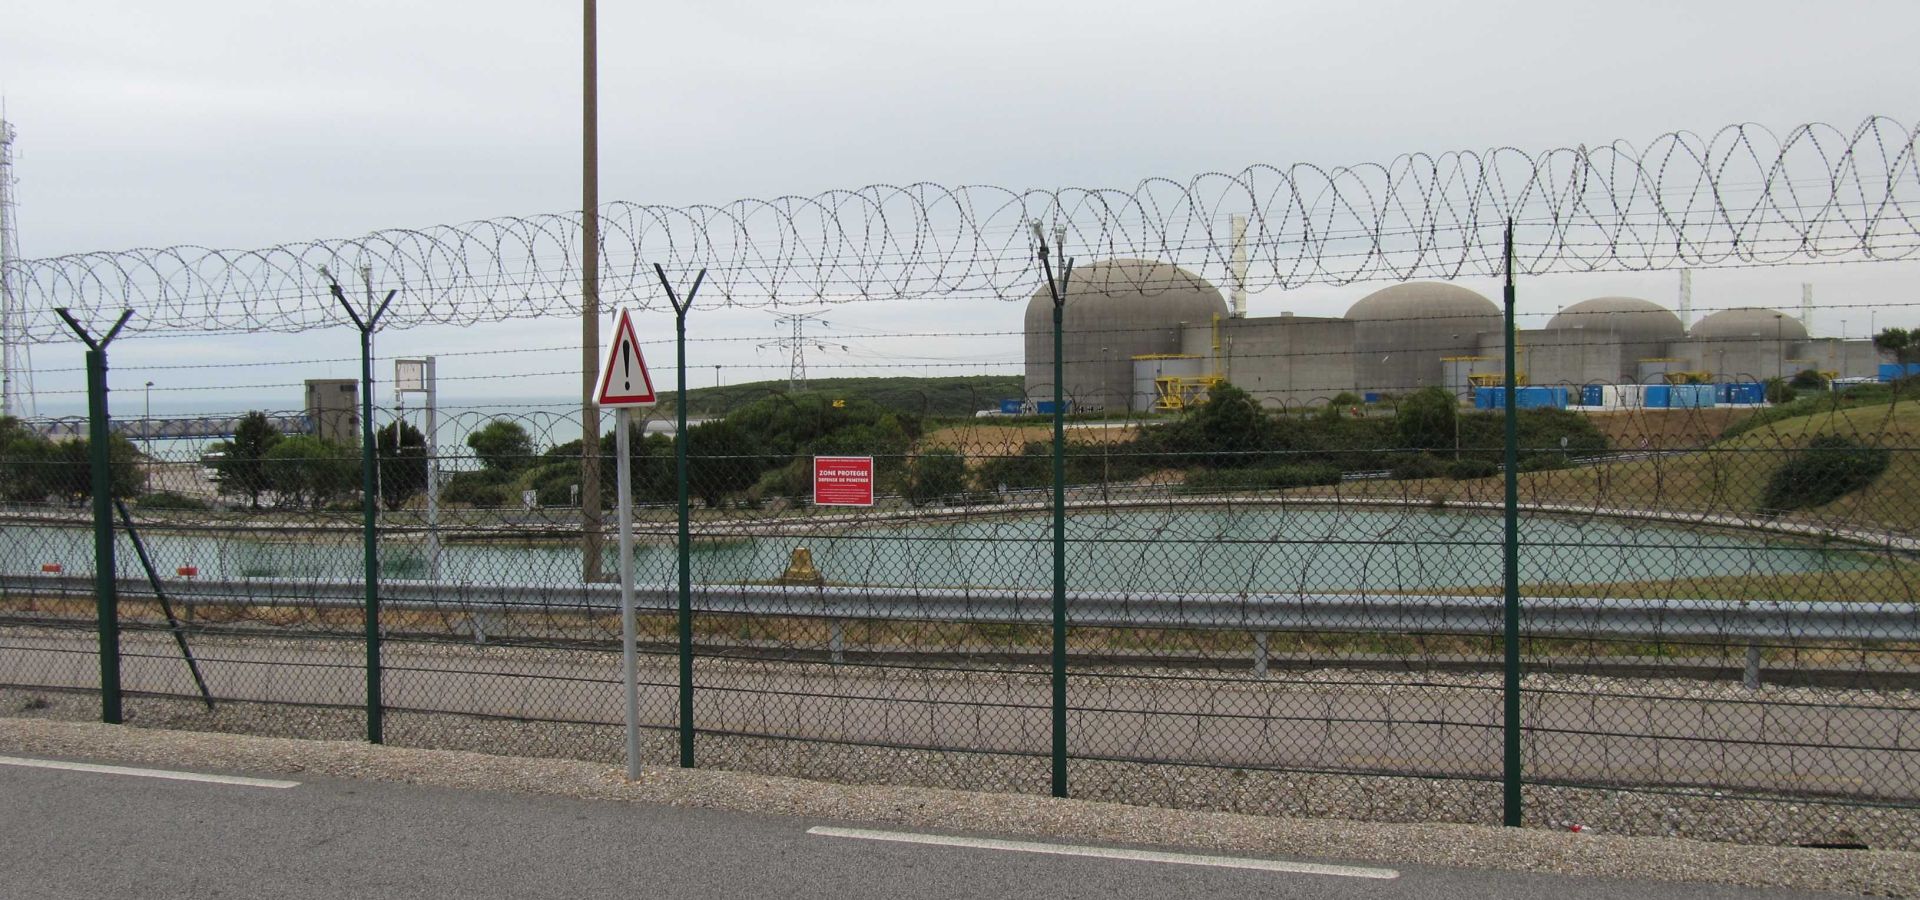 The nuclear power plant in Paluel, France. 